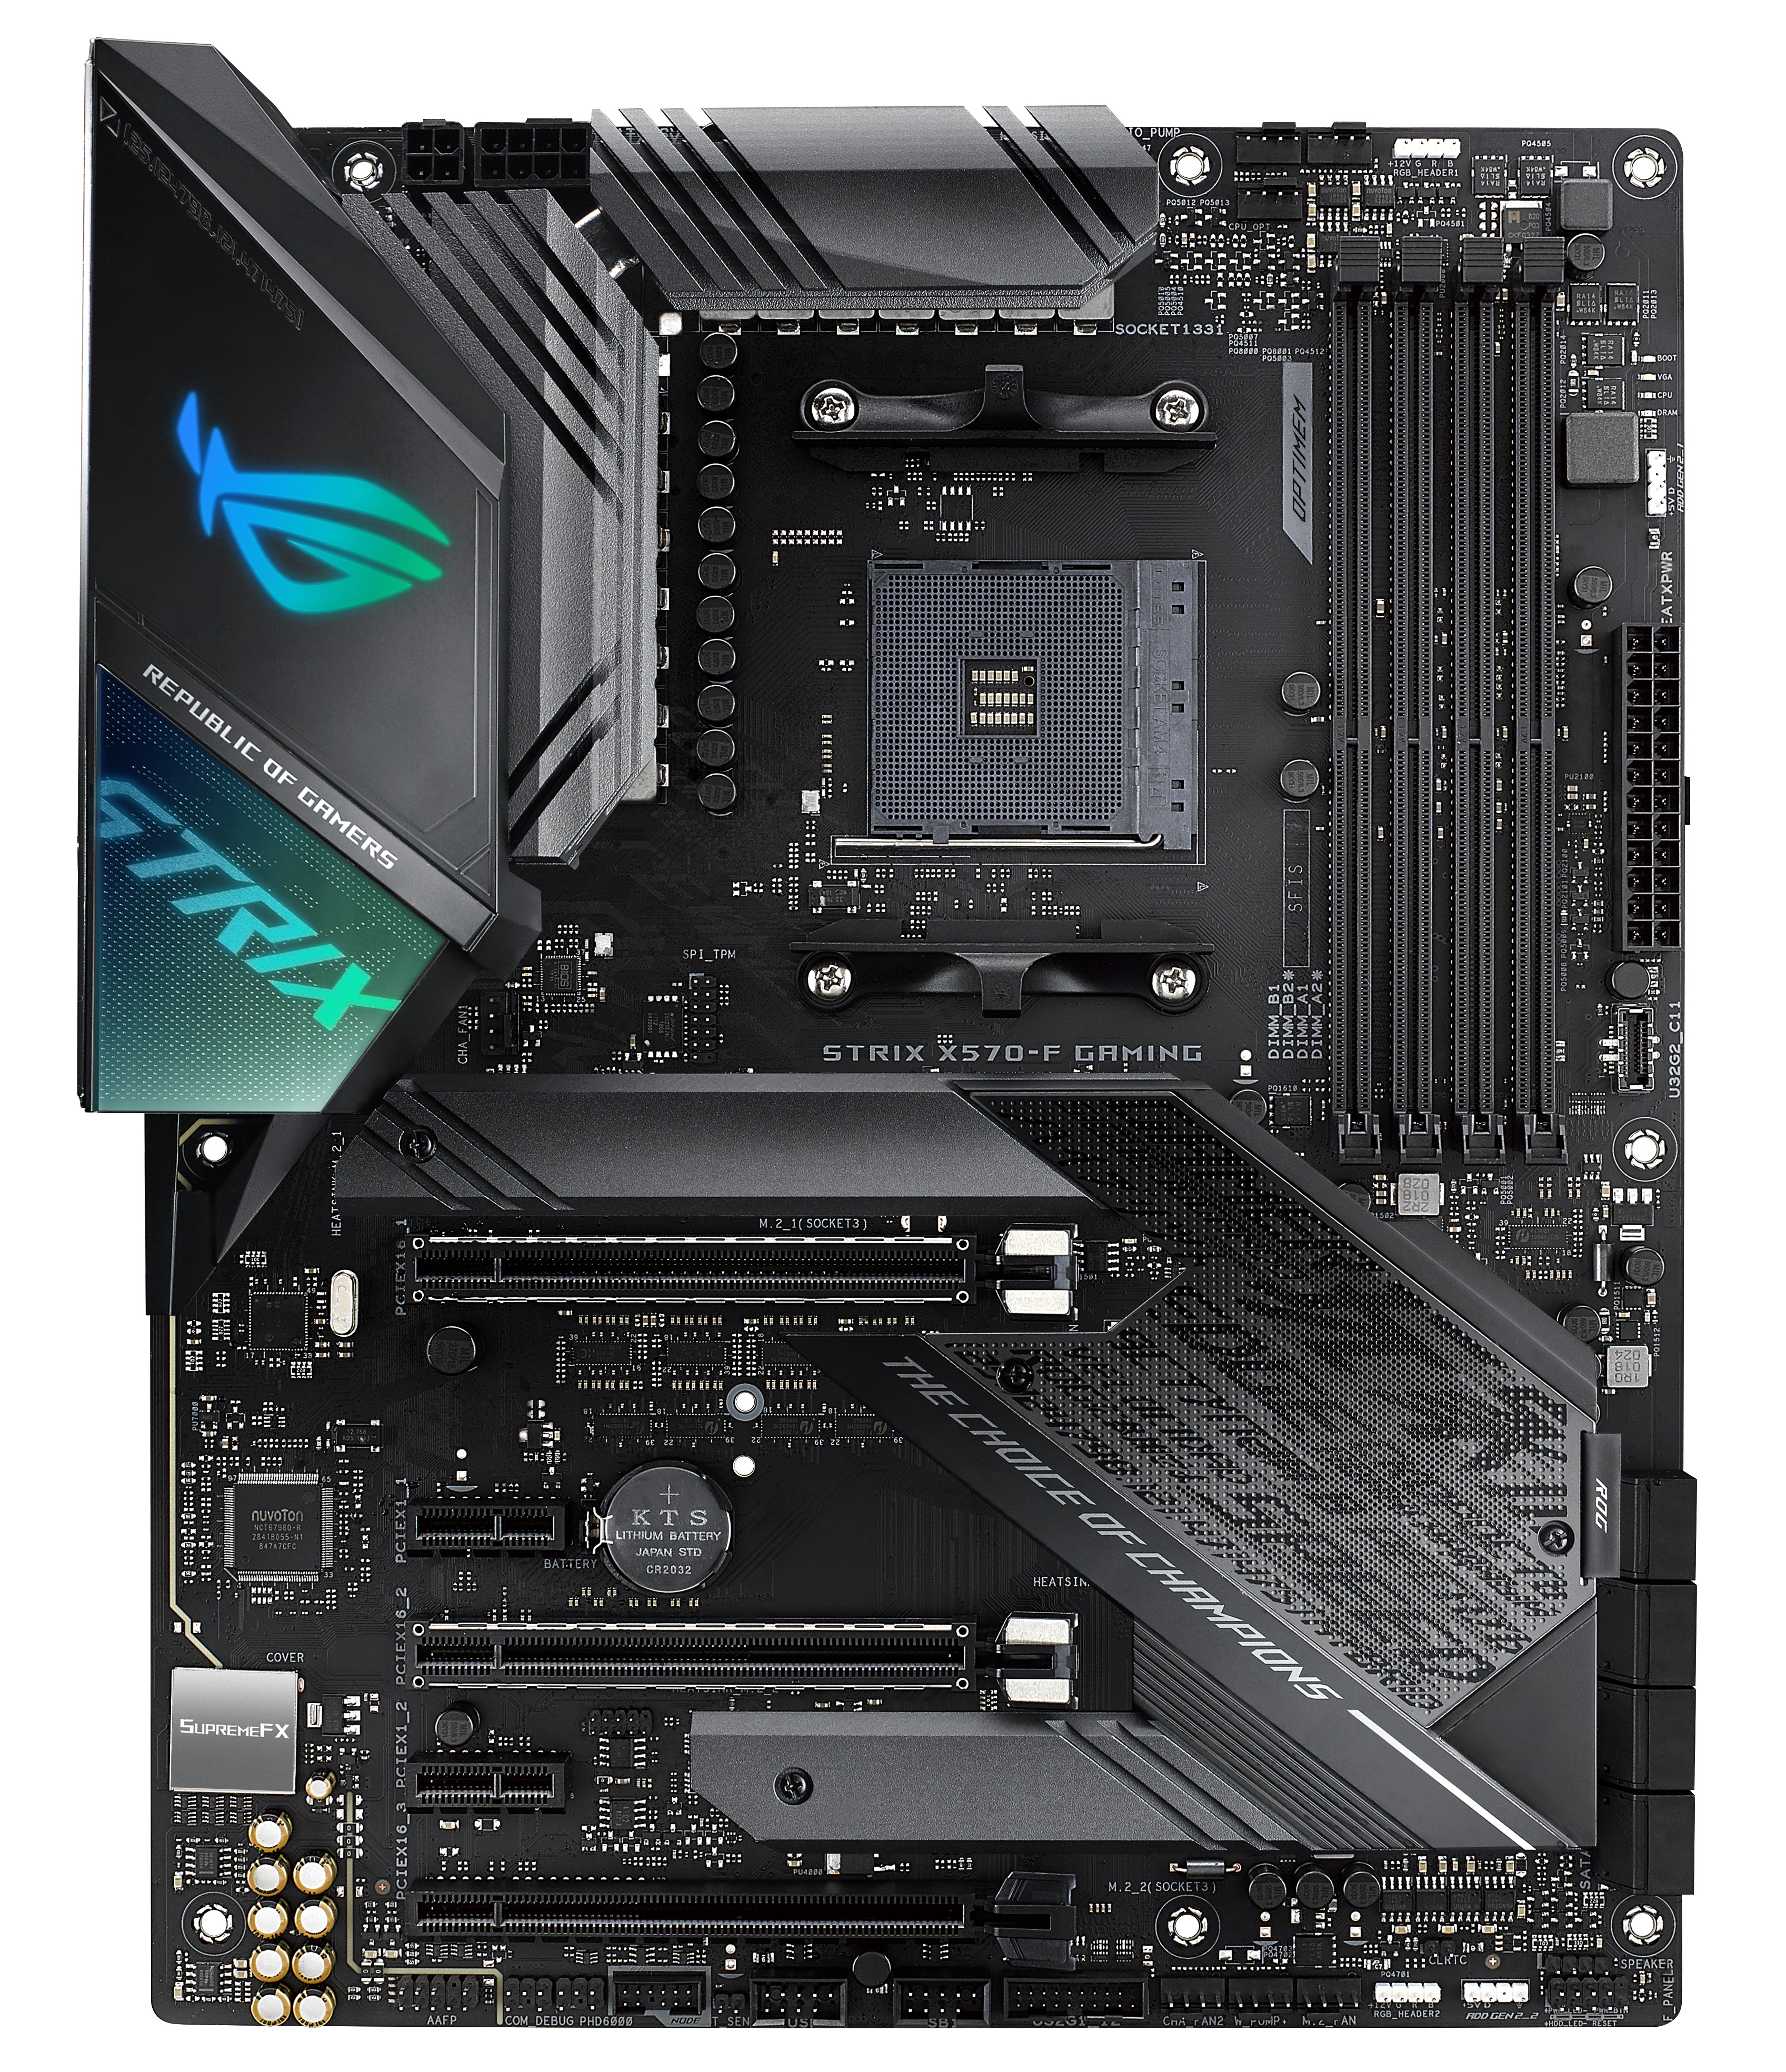 Asus Rog Strix X570 F Gaming The Amd X570 Motherboard Overview Over 35 Motherboards Analyzed